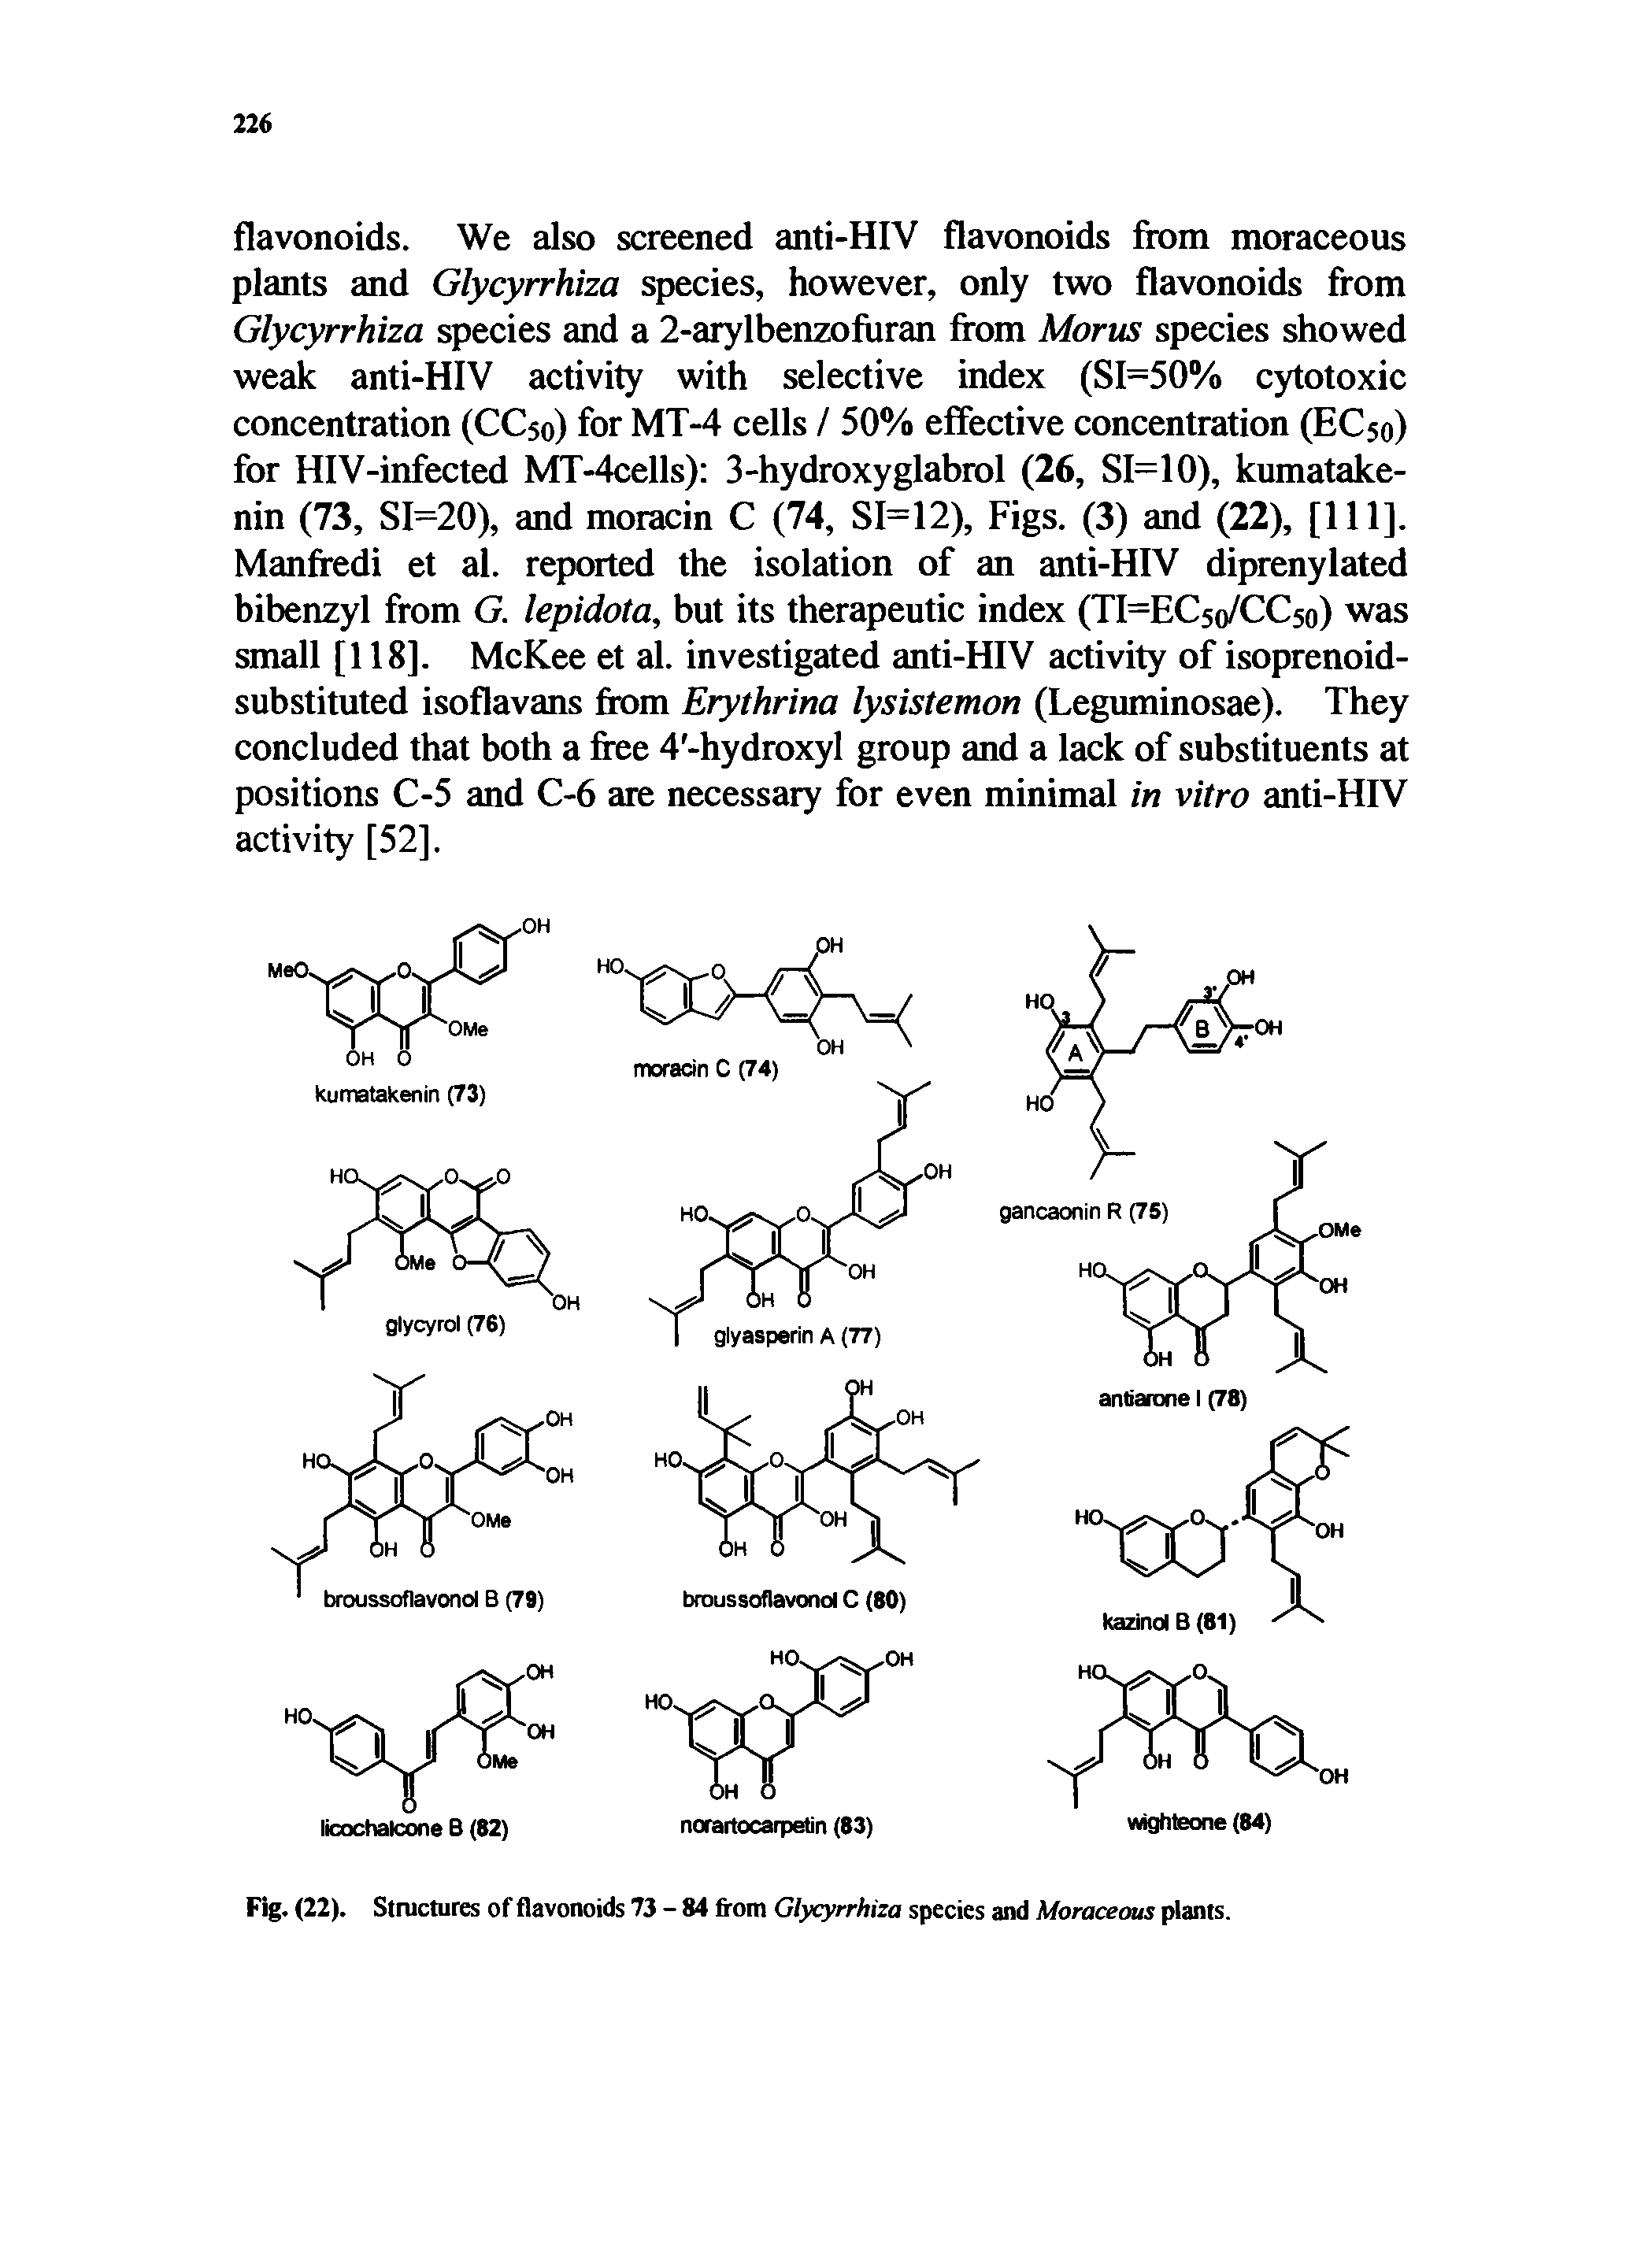 Fig. (22). Structures of flavonoids 73 - 84 from Glycyrrhiza species and Moraceous plants.